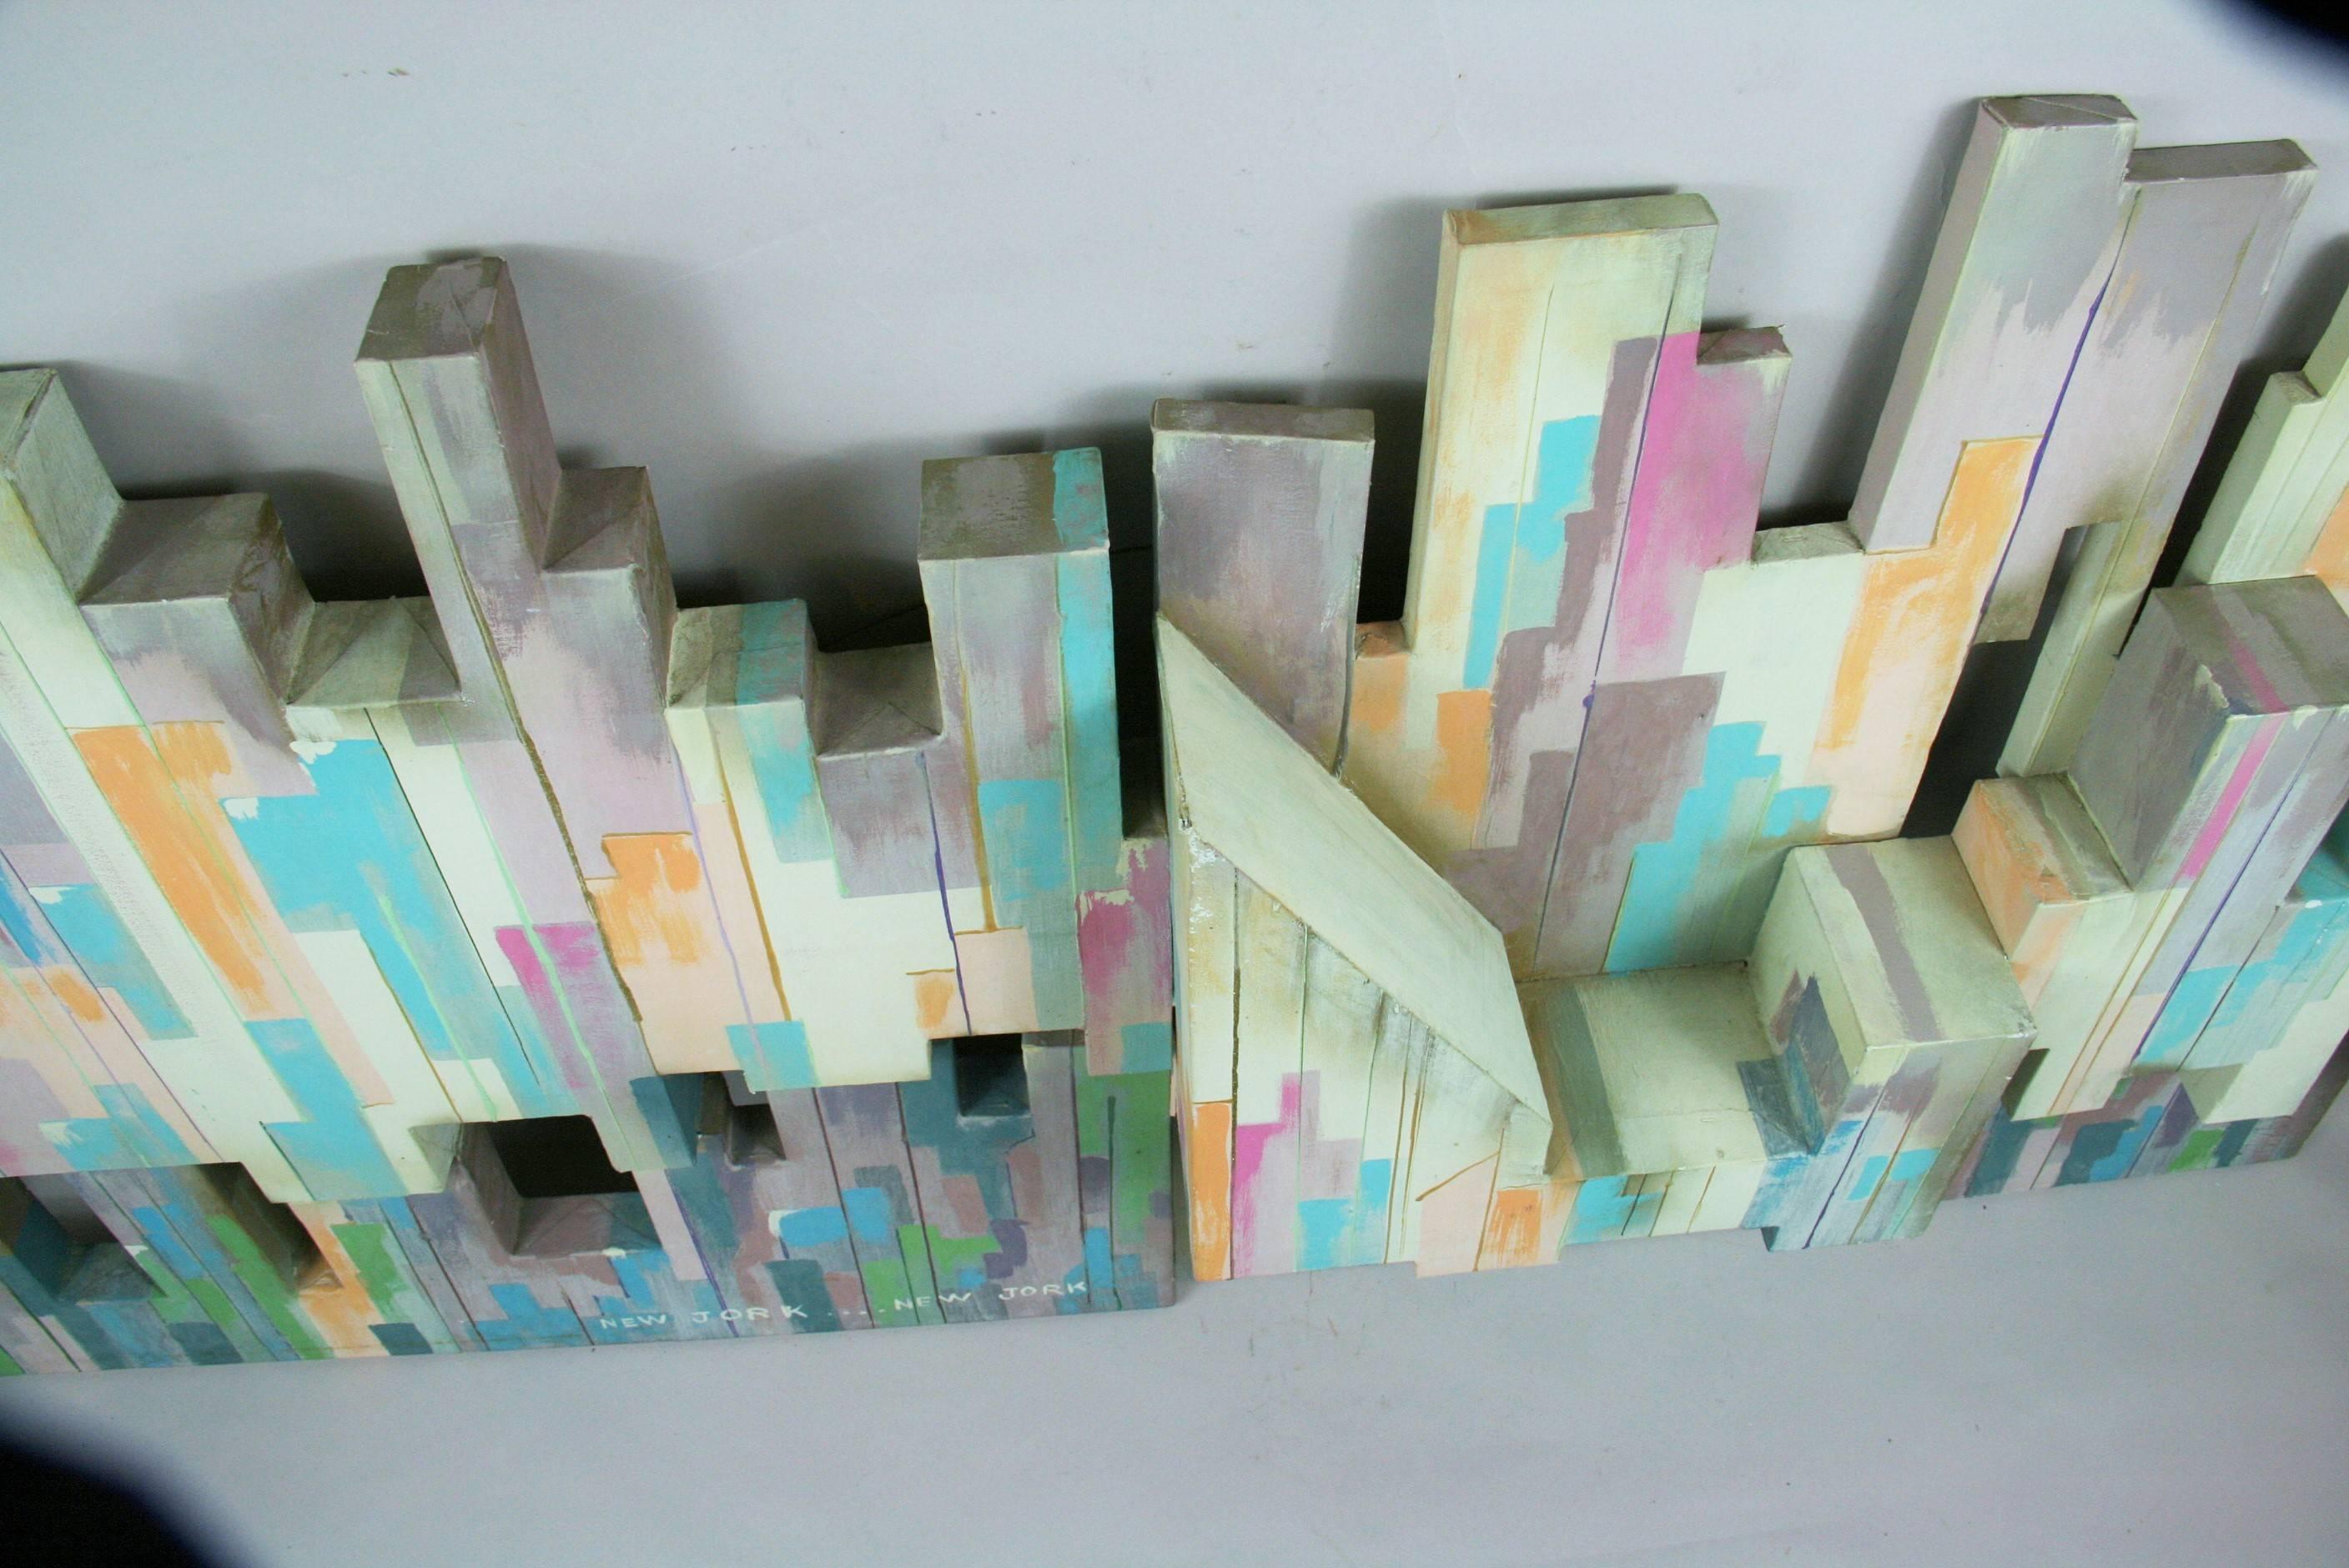 City Skyline Sculptural Painting by Yolay - Sculpture by Unknown